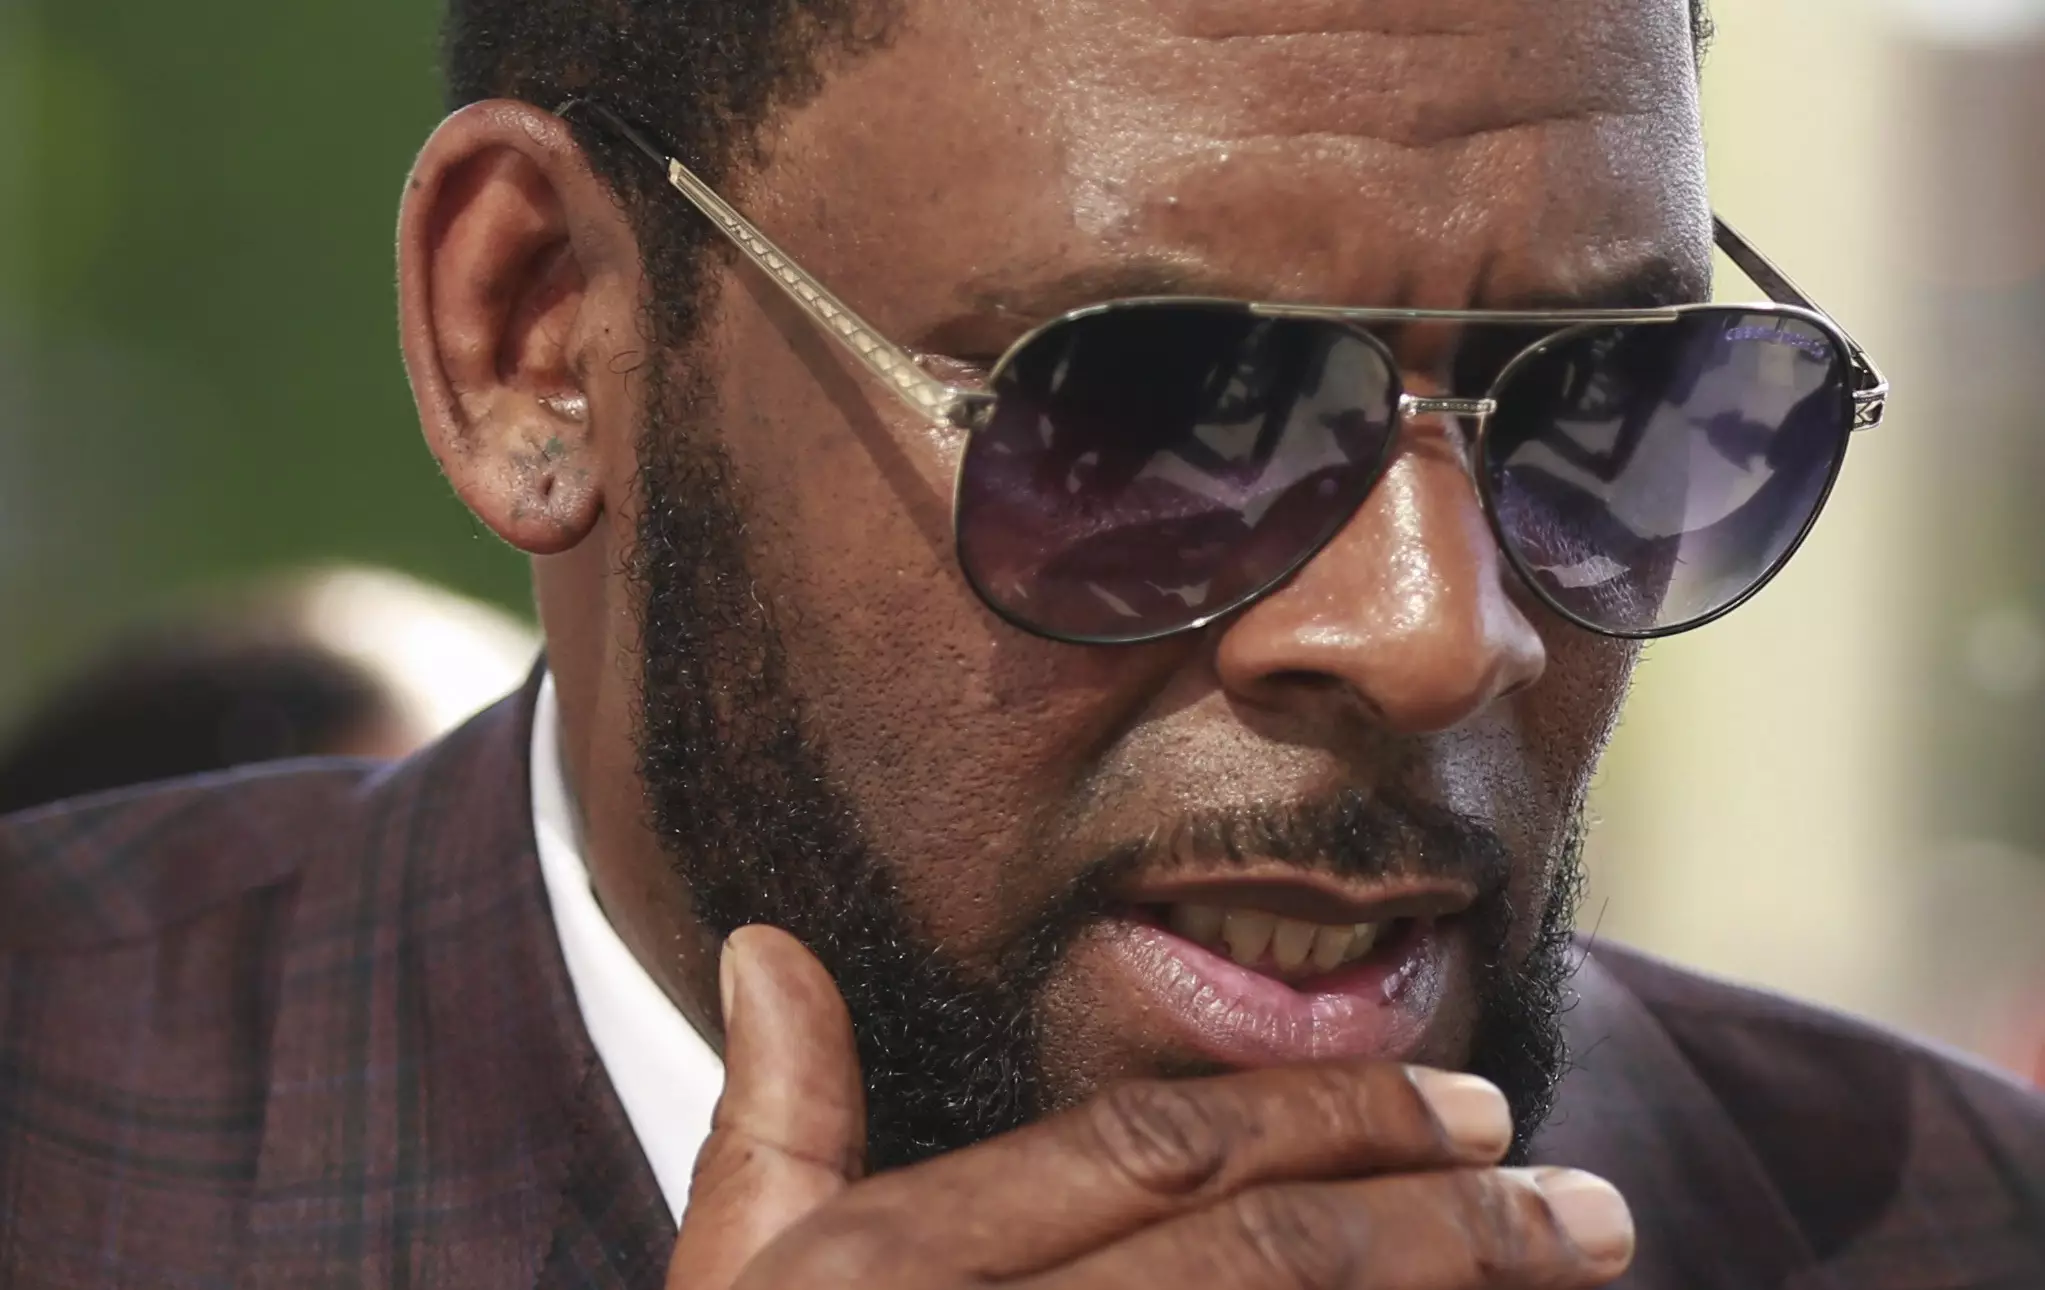 R. Kelly arriving at the Leighton Criminal Court in 2019 for arraignment on sex-related charges.